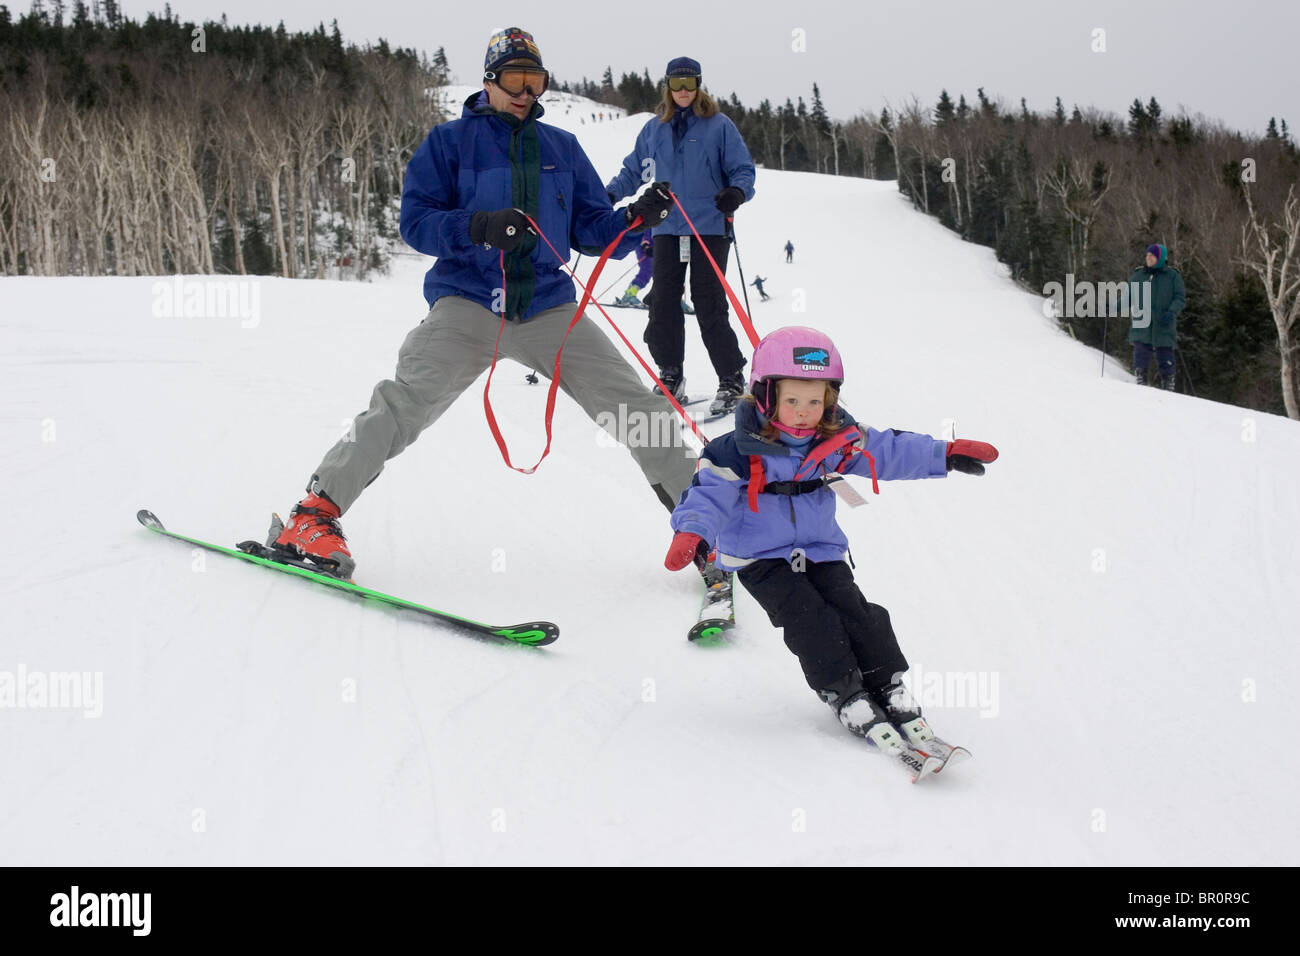 A young girl learns to ski with her family at Sunday River in Bethel, Maine. Stock Photo